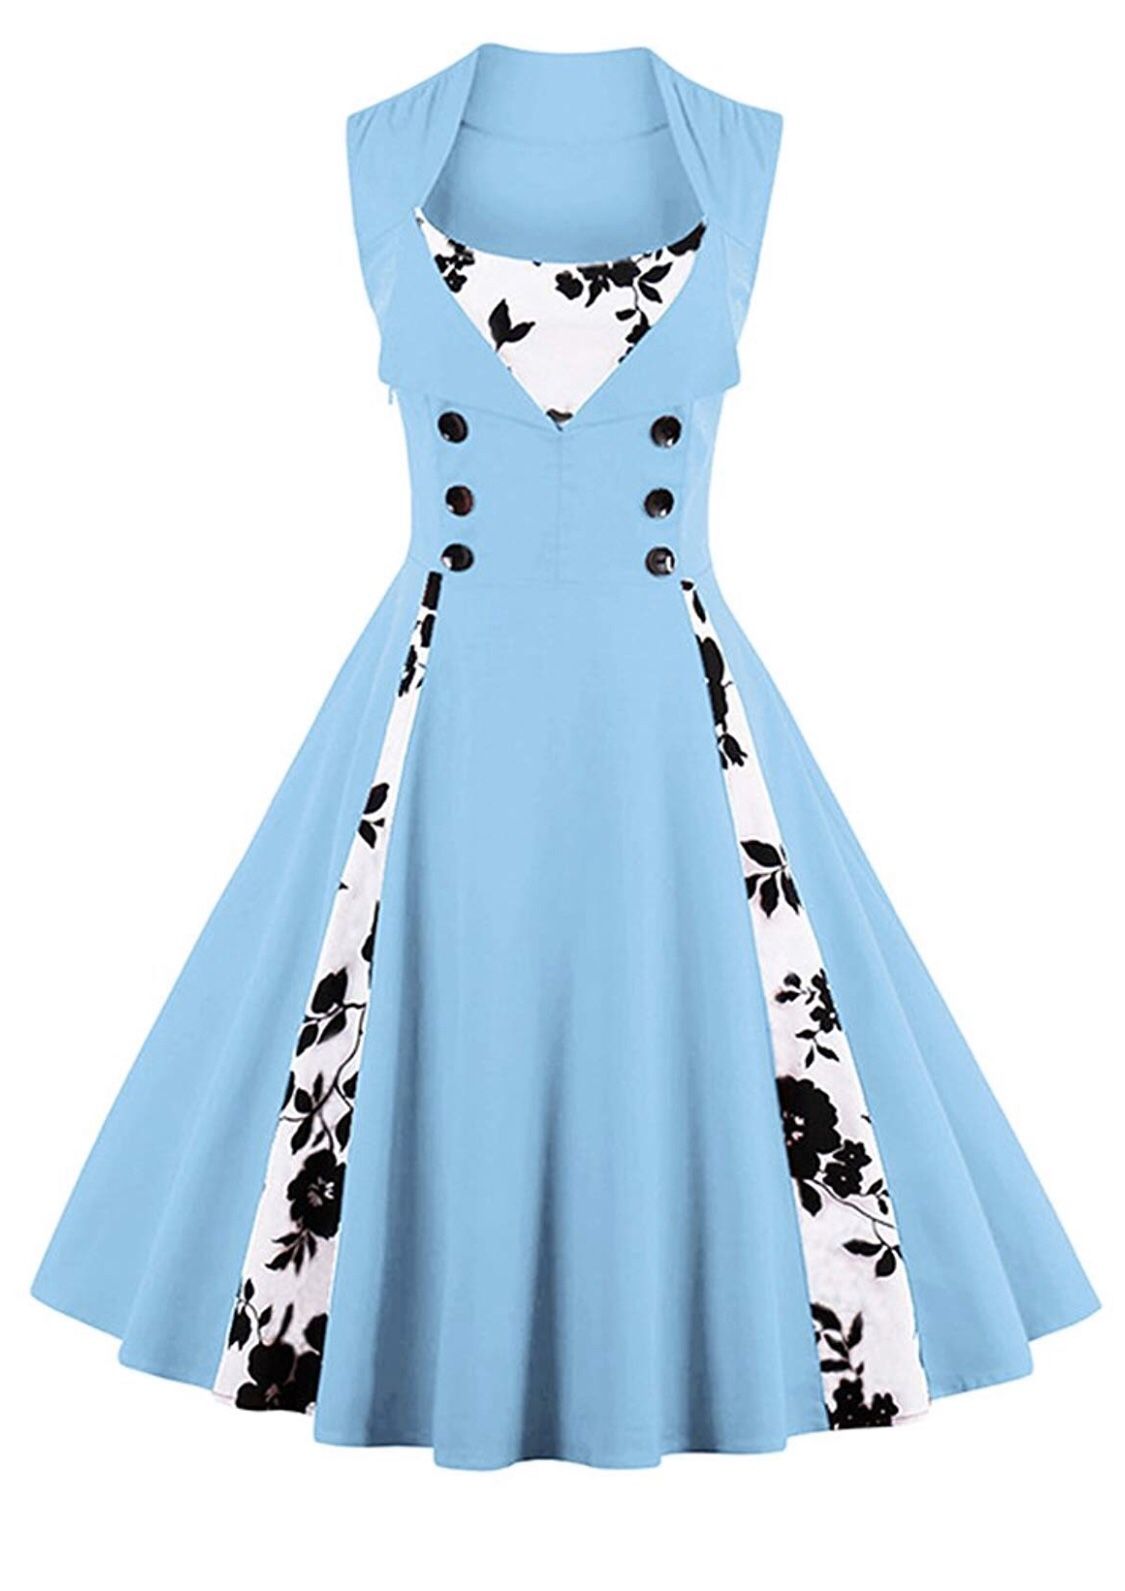 Blue black and white floral women’s vintage 1950s swing cocktail dress